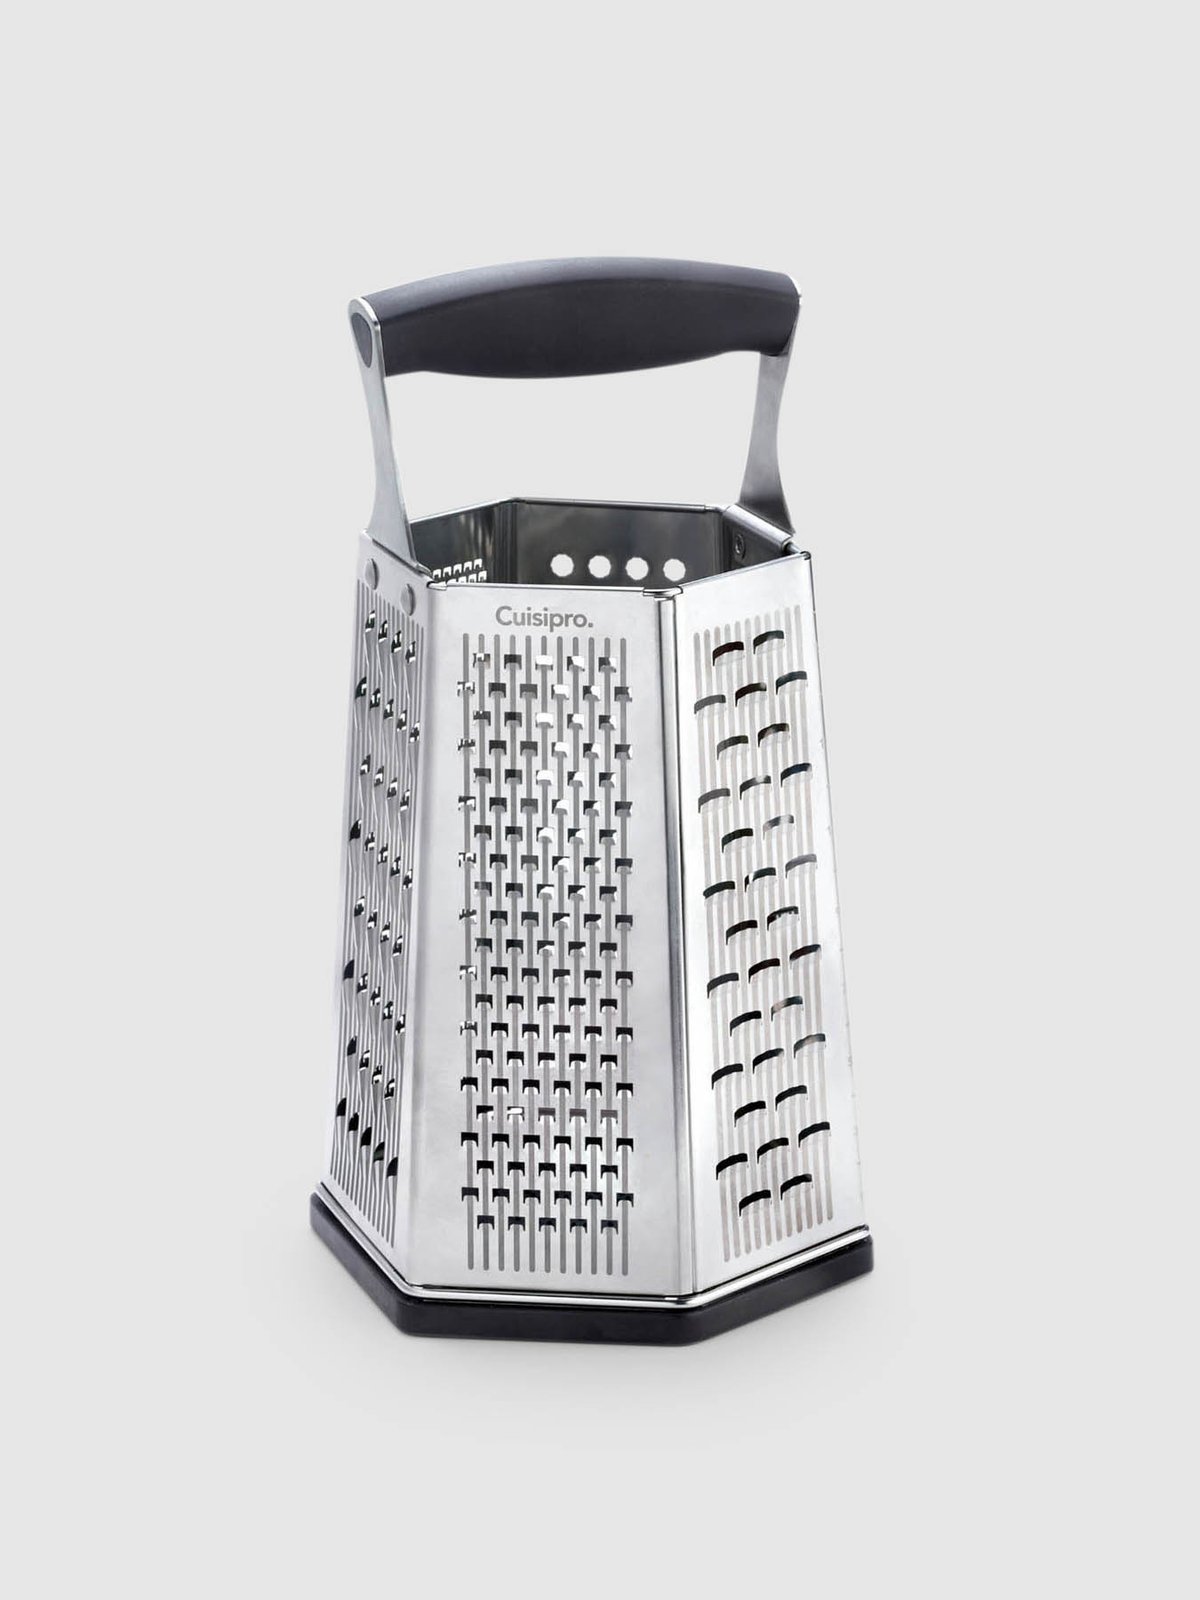 https://images.verishop.com/cuisipro-cuisipro-silver-6-sided-box-grater/M00065506068770-3965612143?auto=format&cs=strip&fit=max&w=1200